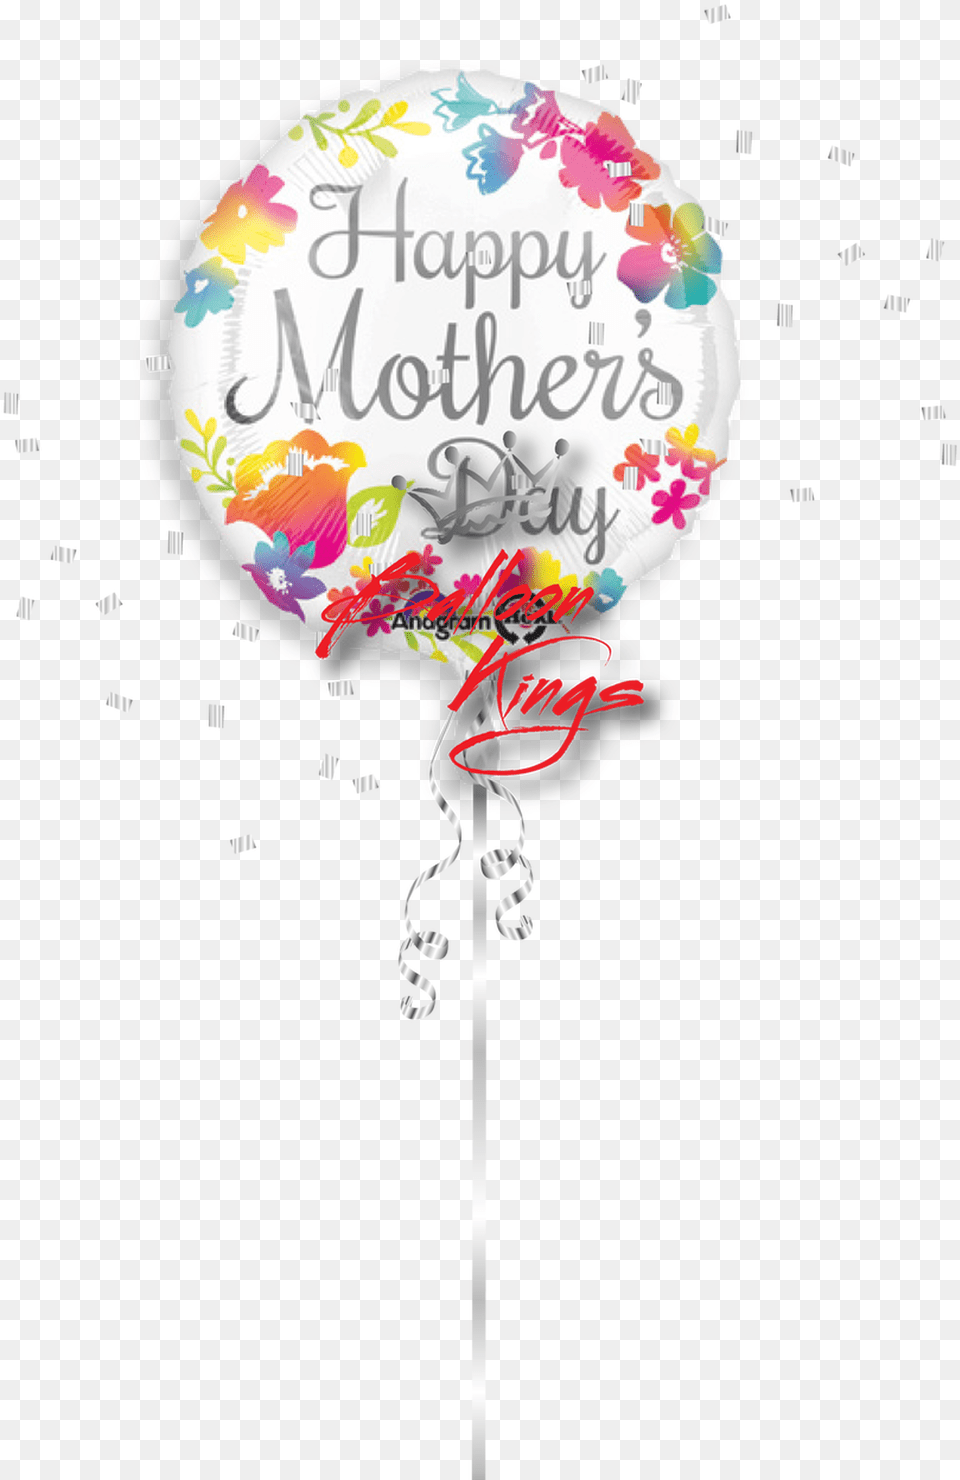 Happy Mothers Day Watercolor Day Balloons Foil, Balloon, Food, Sweets Png